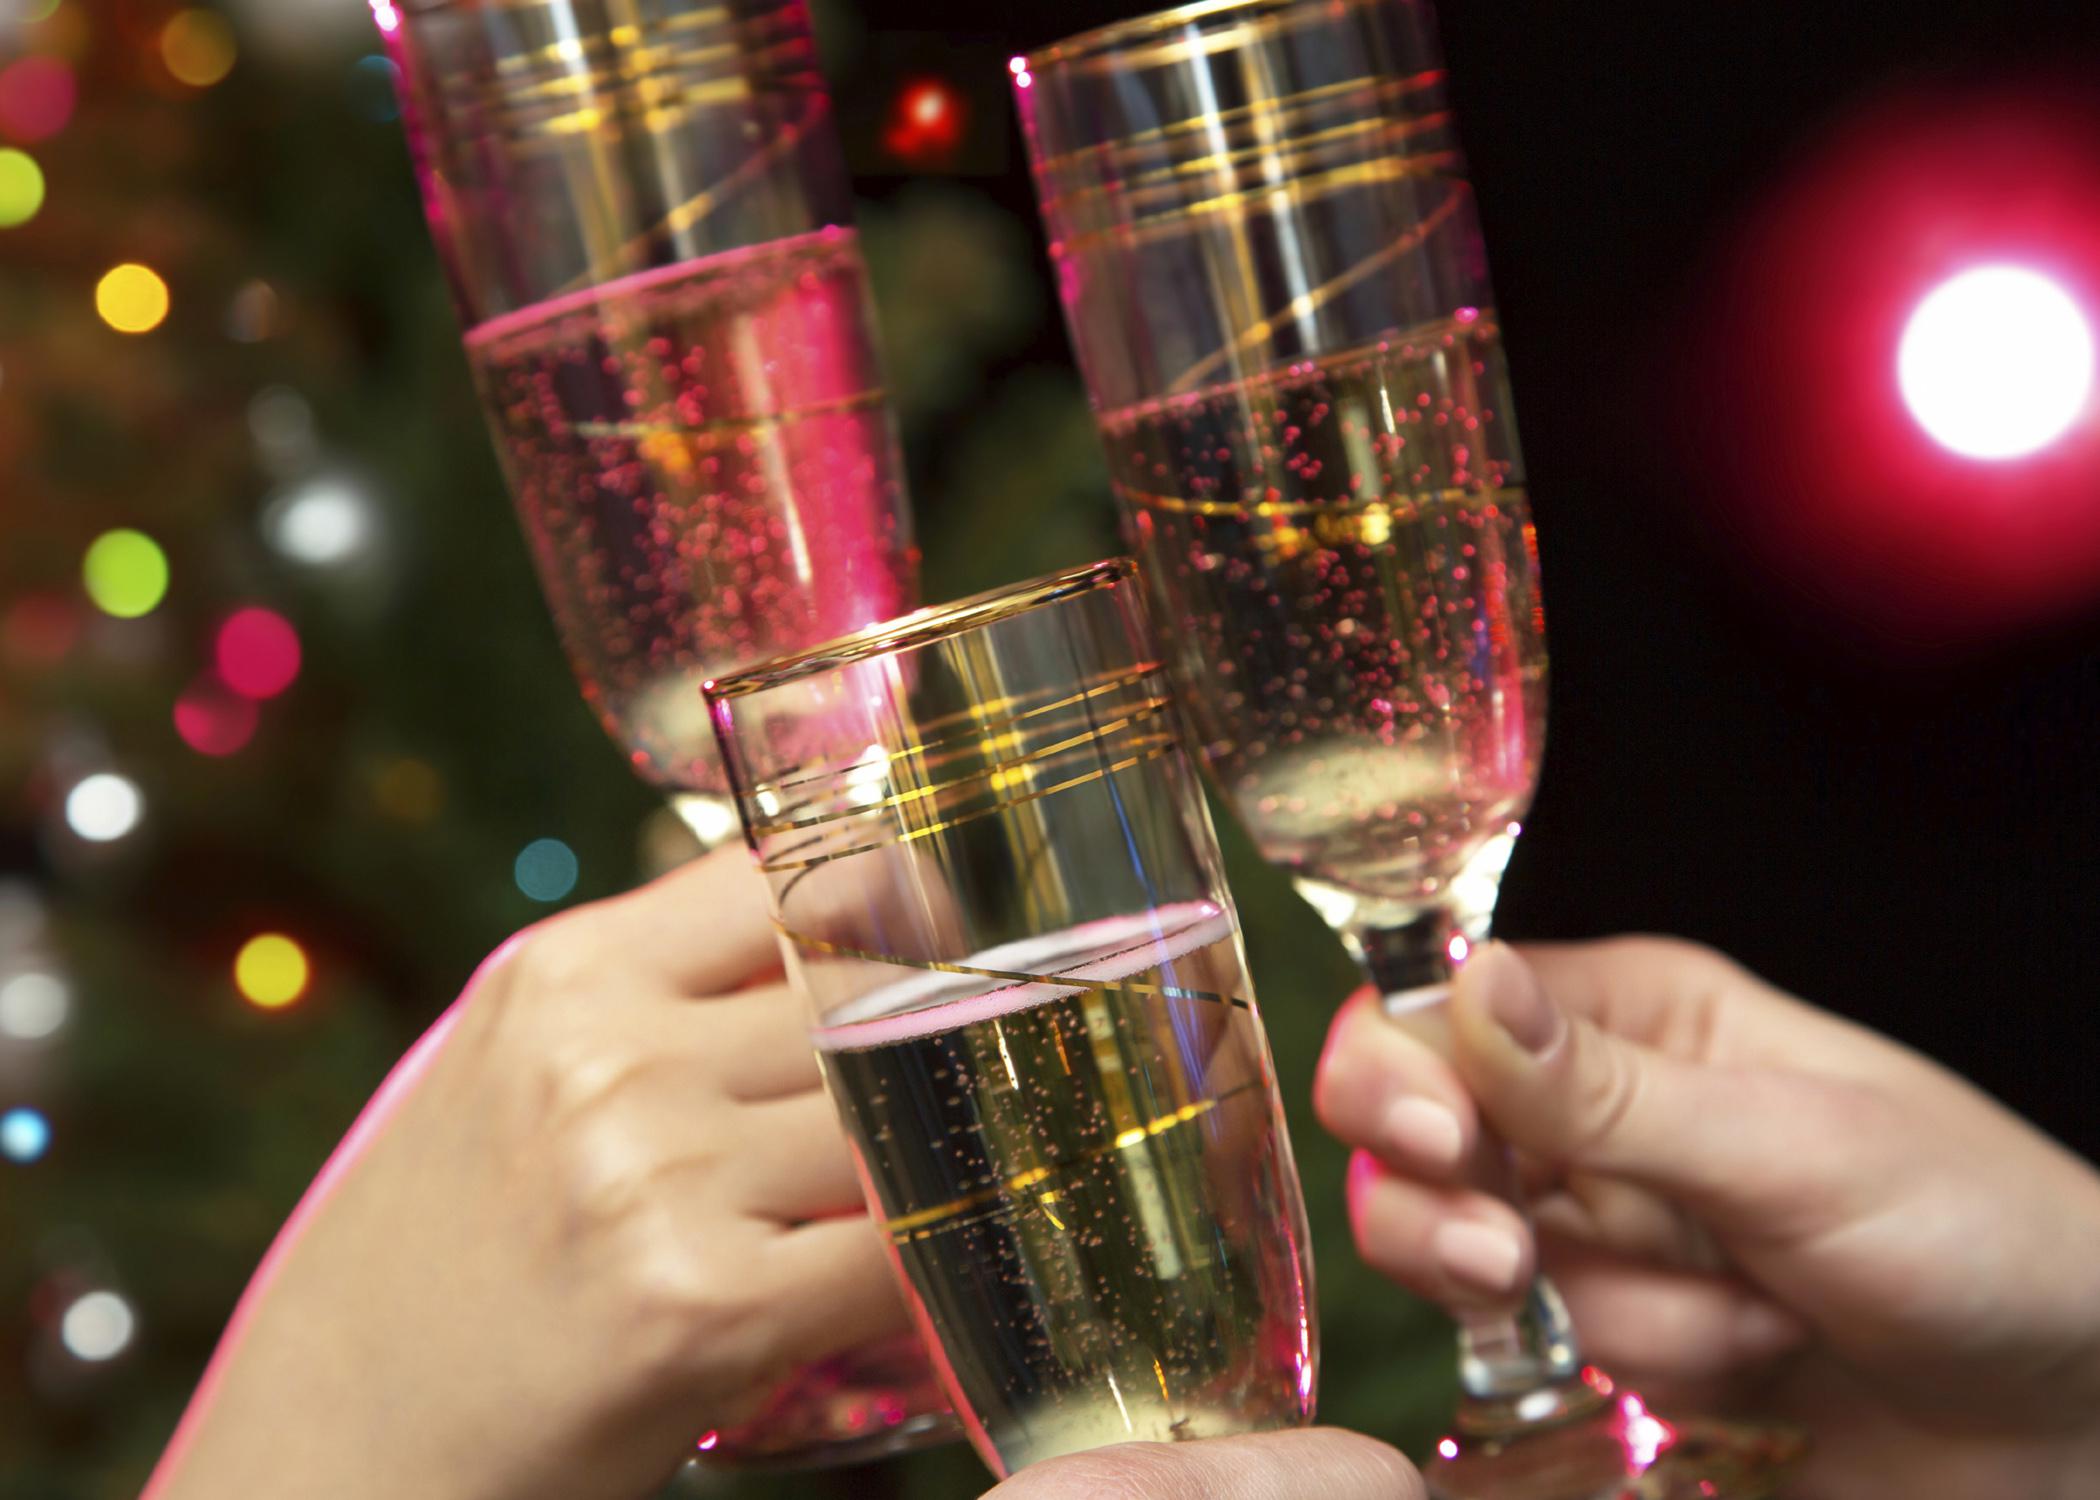 Holiday stress can trigger excessive drinking for alcoholics. Individuals in recovery from alcohol addiction should avoid gatherings with alcohol or make special arrangements if they must attend. (Photo from istockphoto/Chagin)